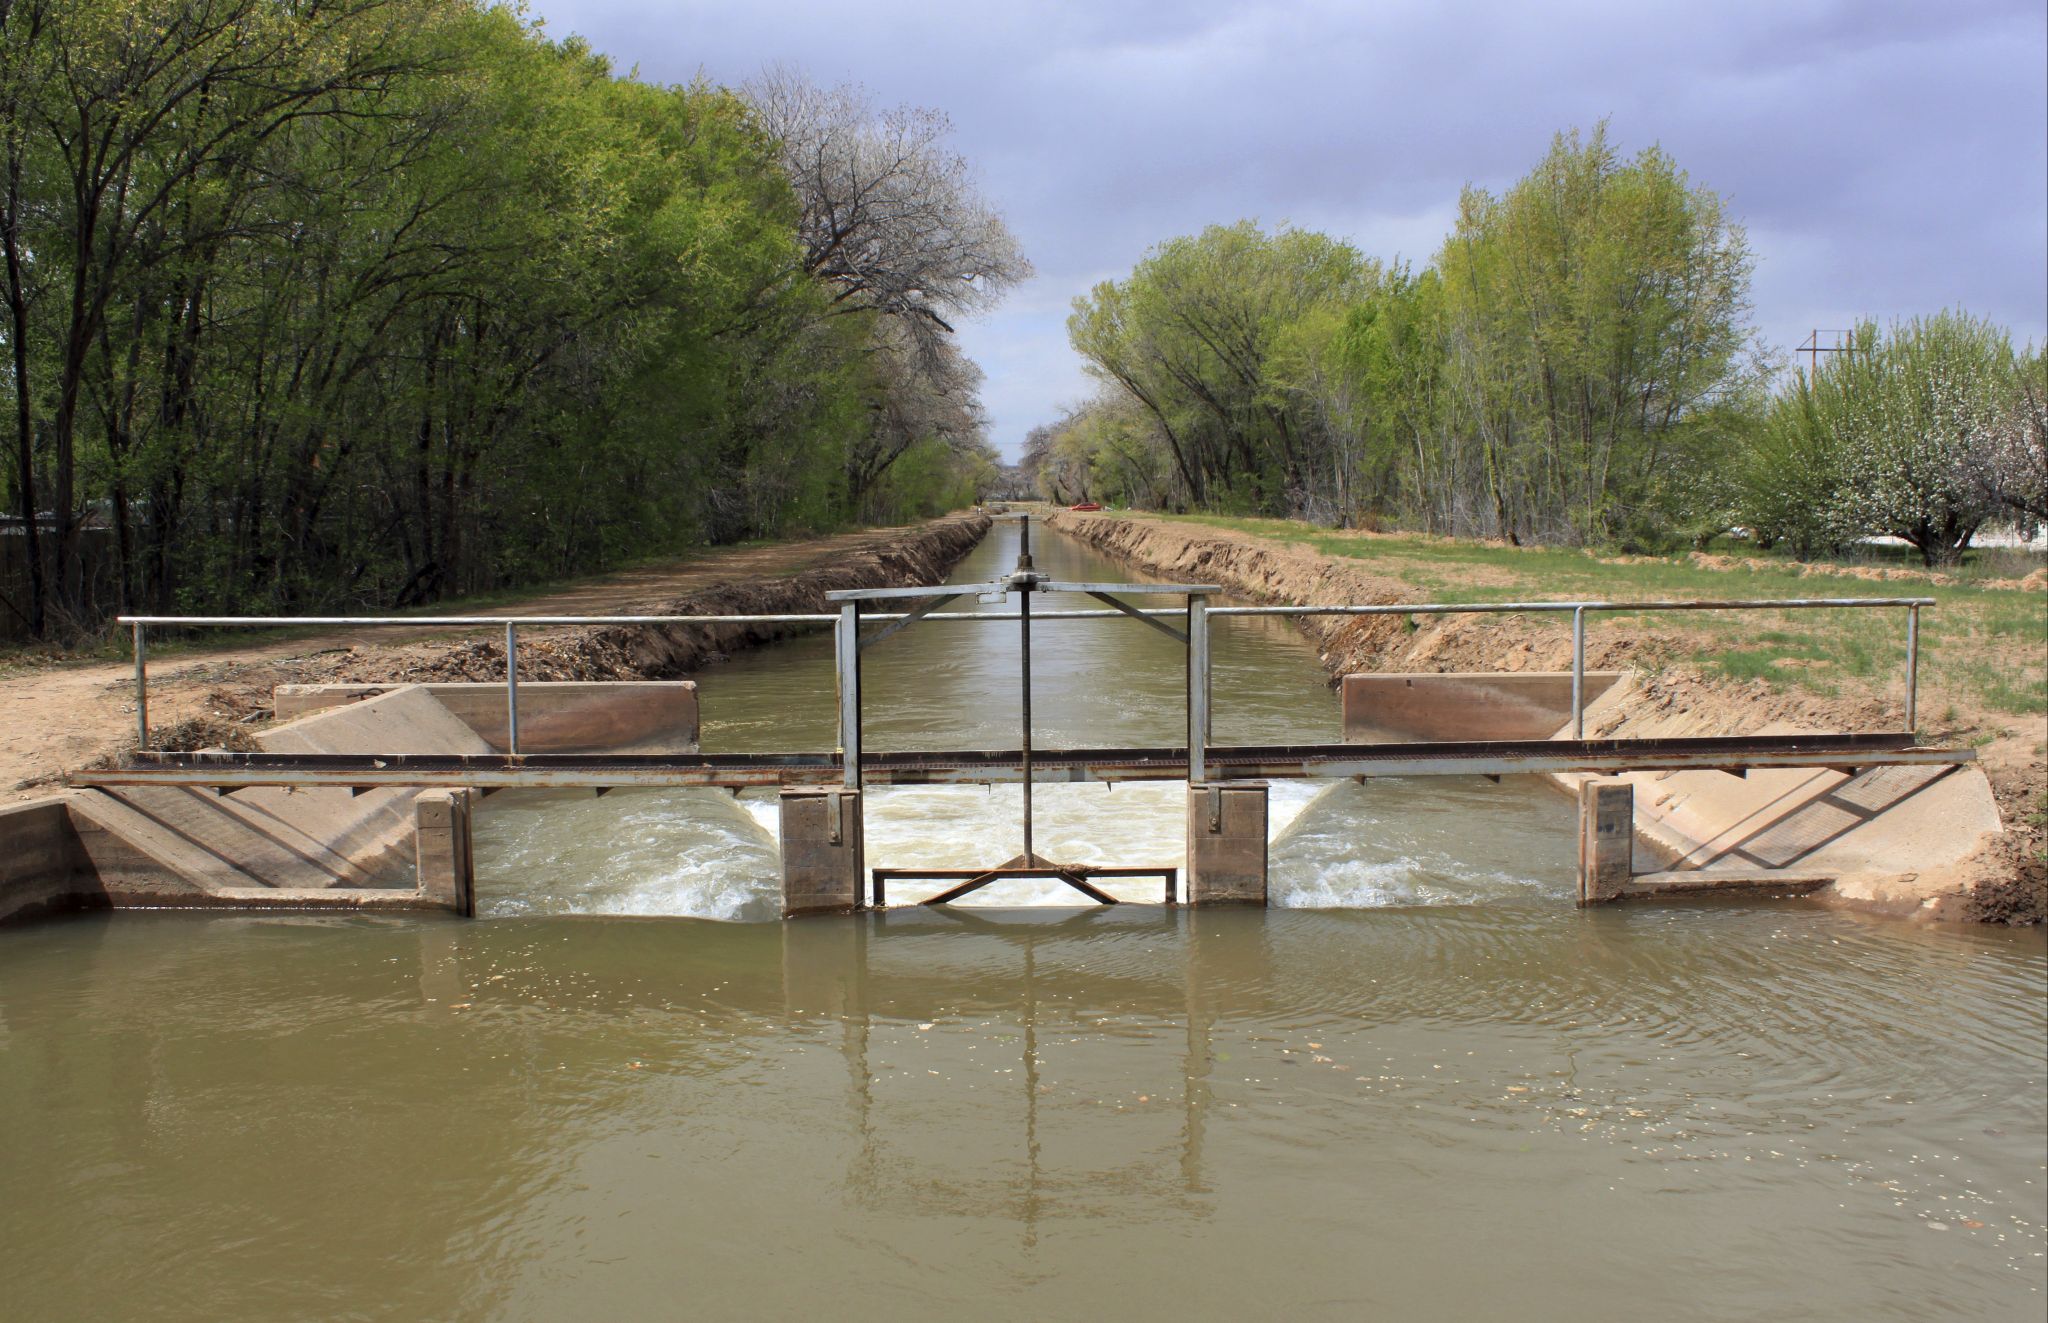 New Mexico consortium seeks to expand use of produced water - Midland Reporter-Telegram